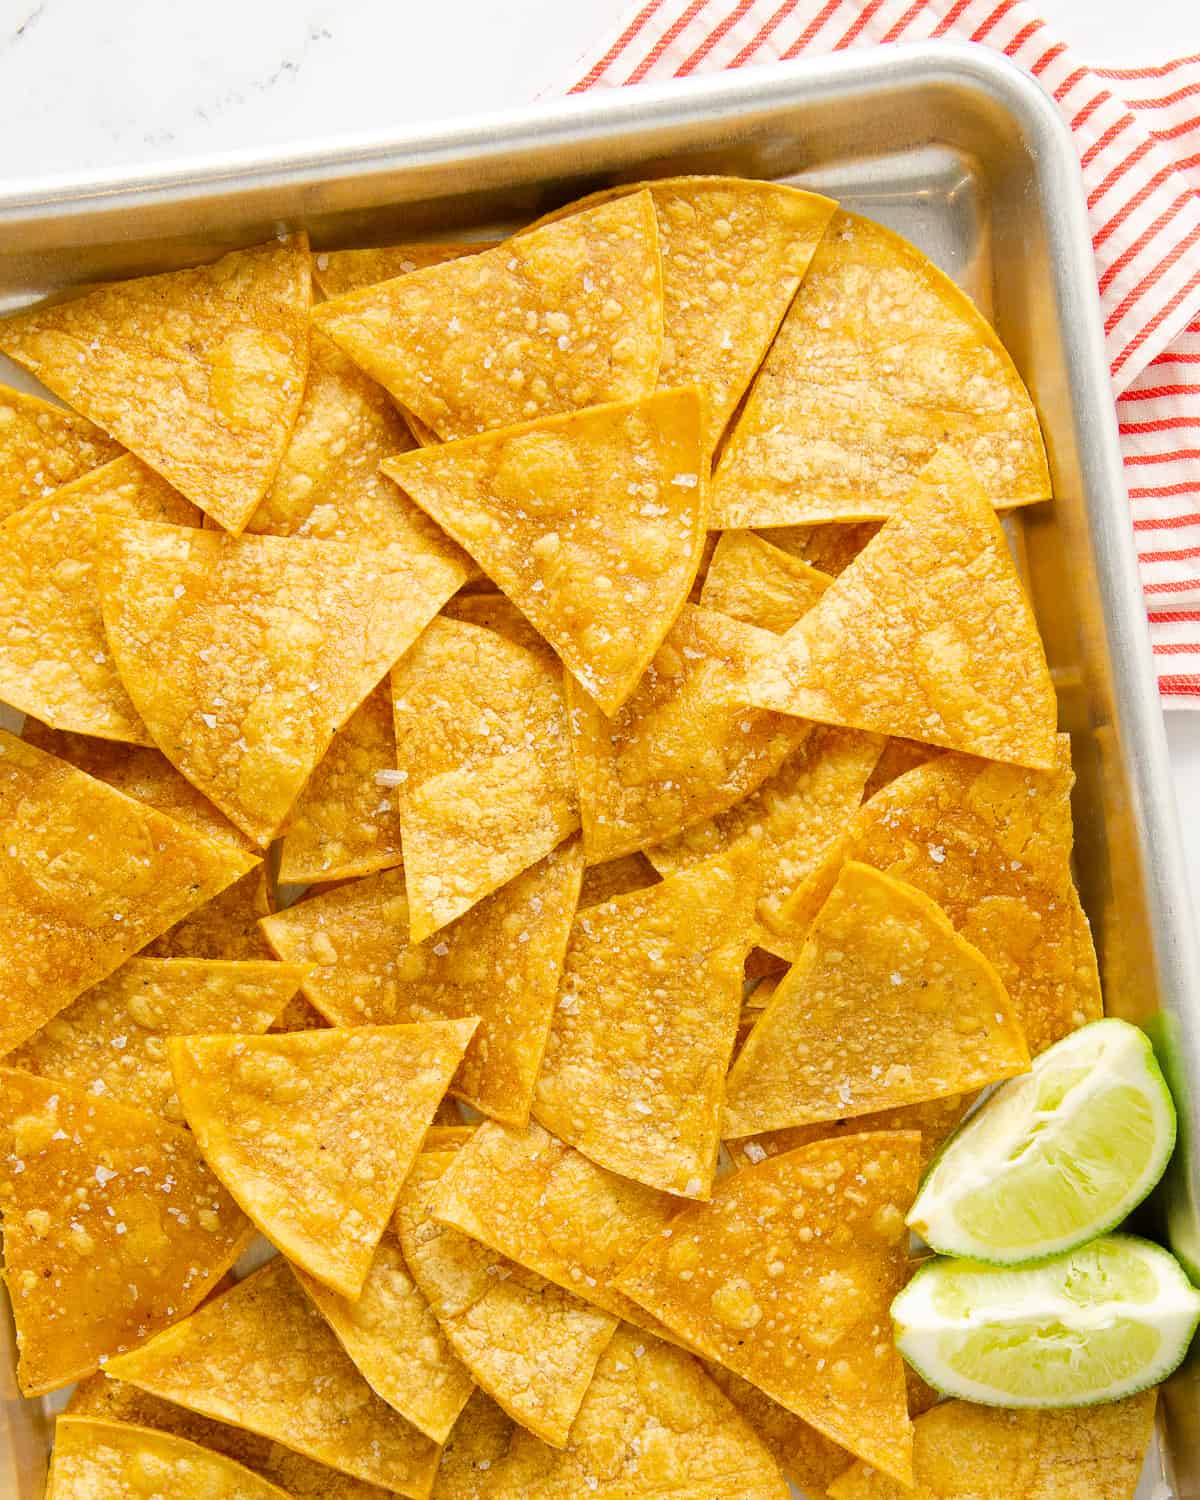 Baked corn tortilla chips on a sheet with limes.